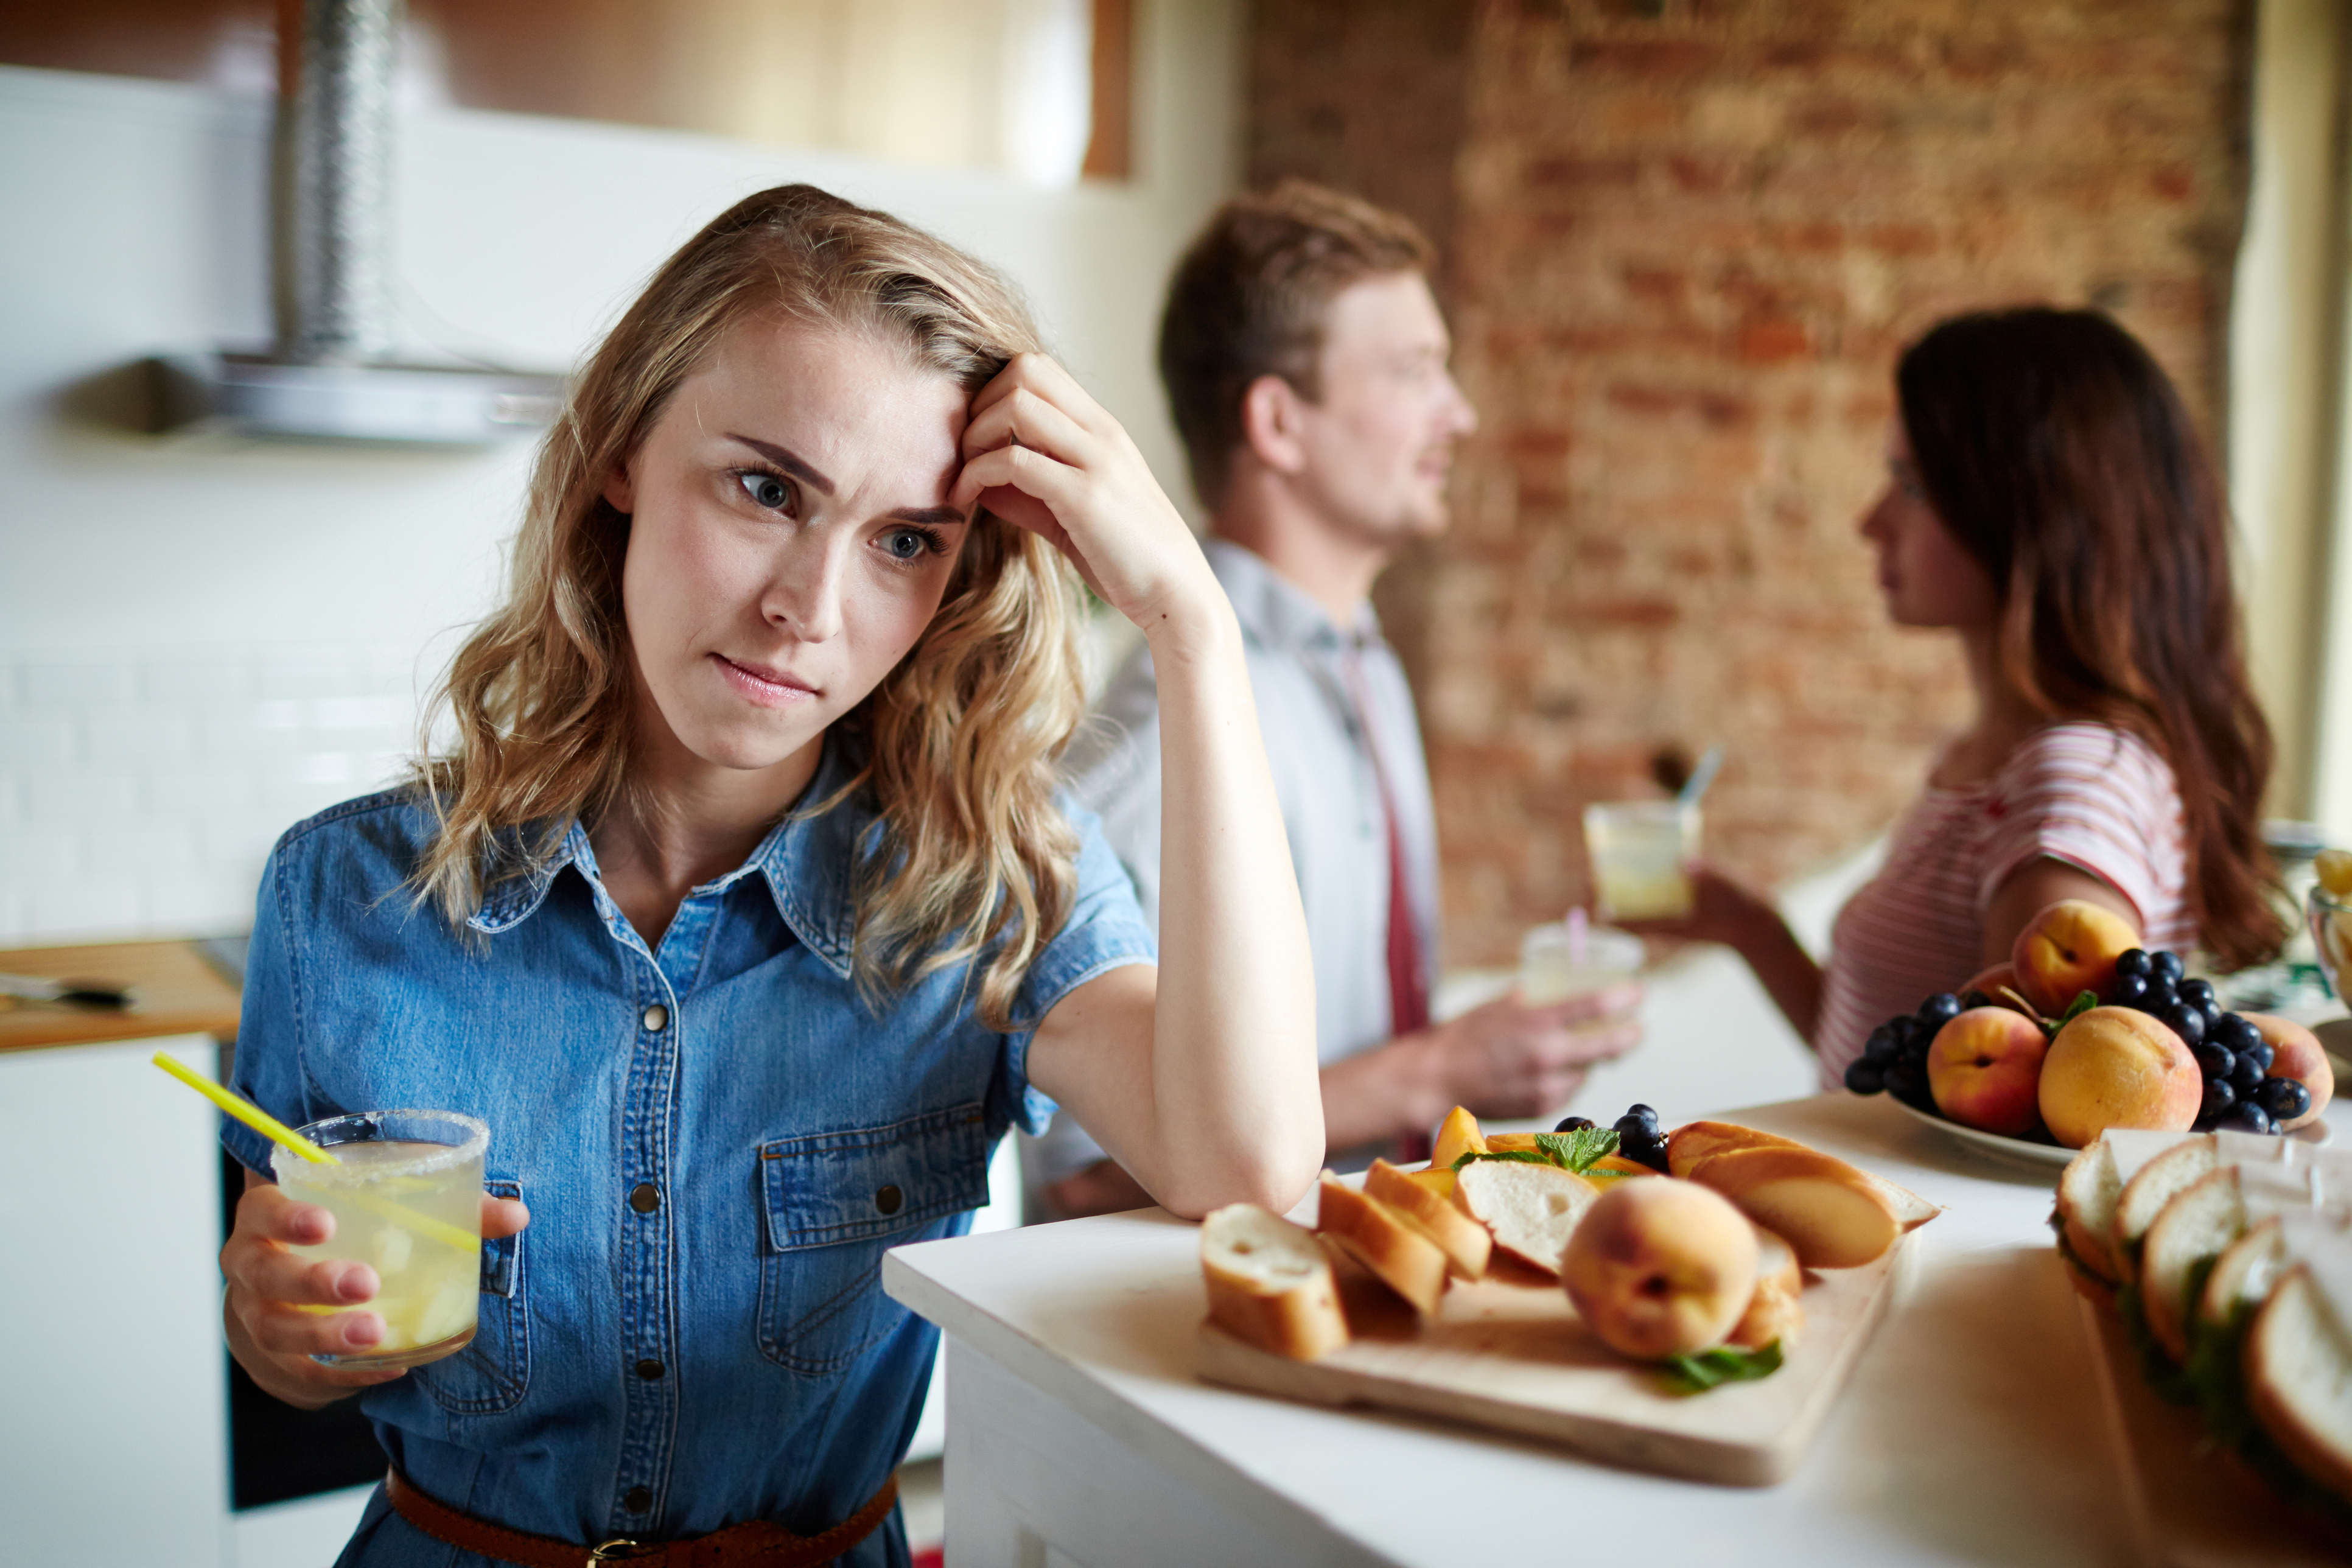 How To Go About Coping With Jealousy In Dating And Relationships